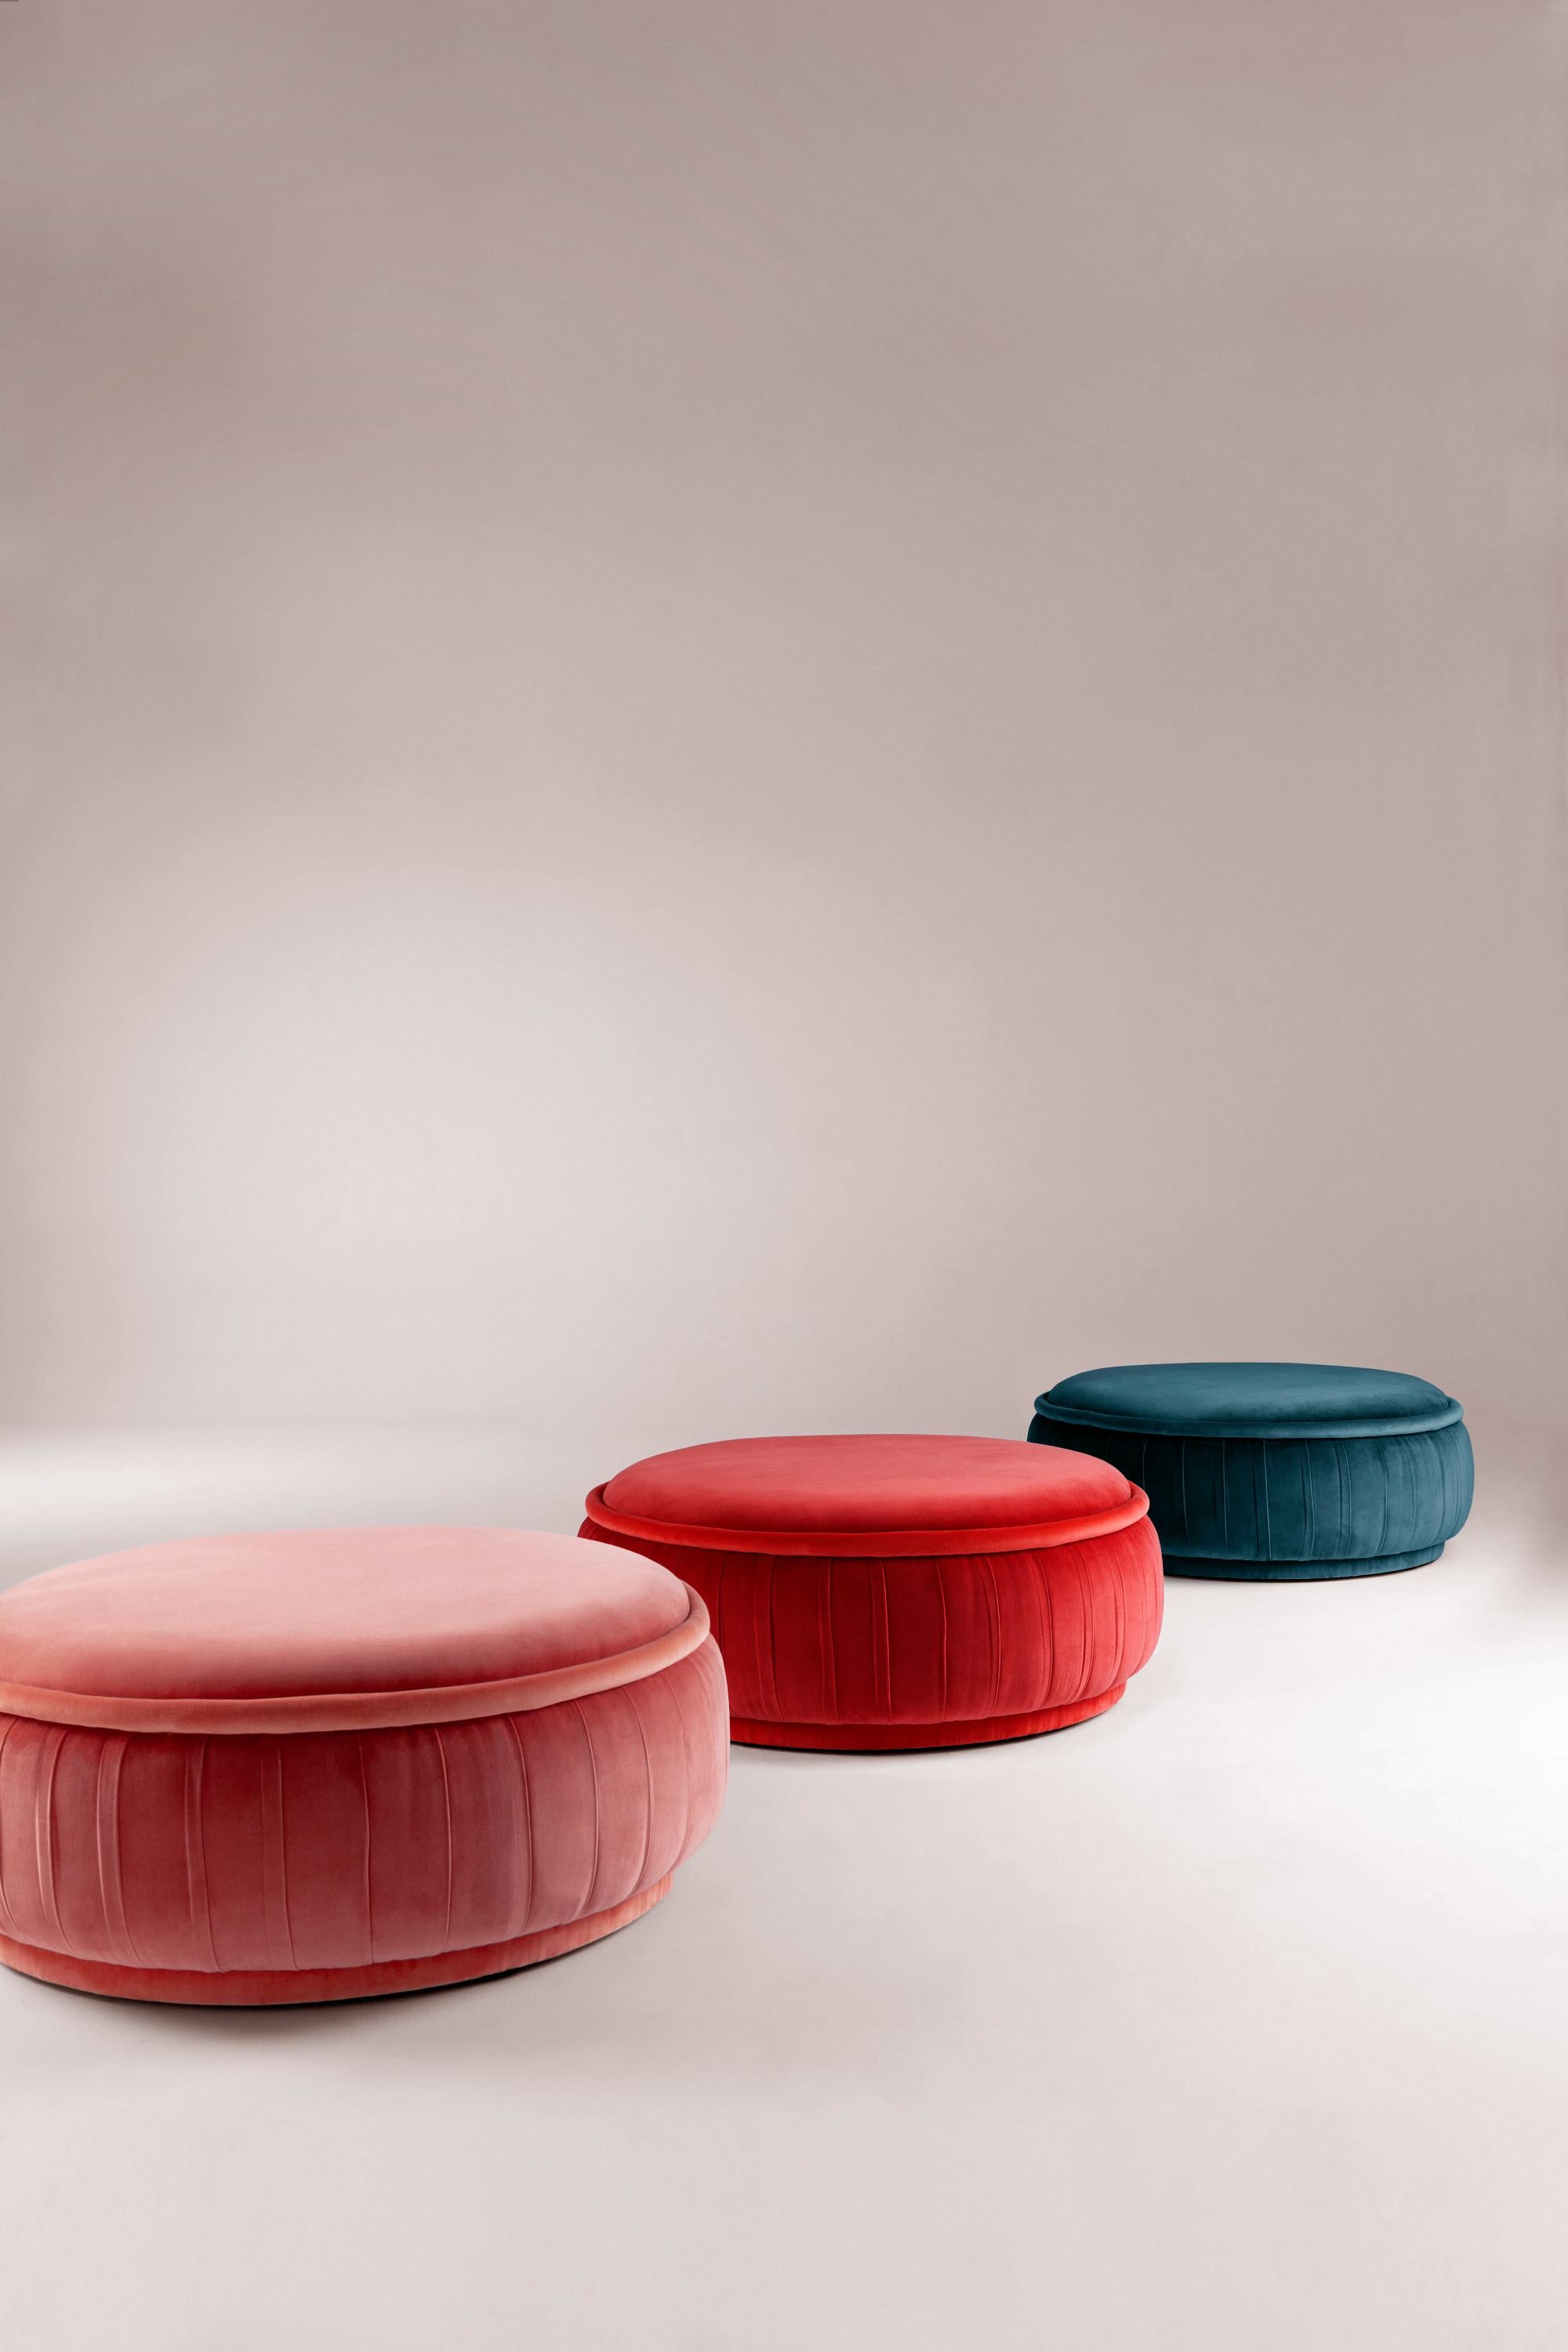 Malibu Pouf by Dooq
Ø 100 cm 39”
h 35 cm 14”

Materials: upholstery and piping fabric or leather

Dooq is a design company dedicated to celebrate the luxury of living. Creating designs that stimulate the senses, whose conceptual approach is